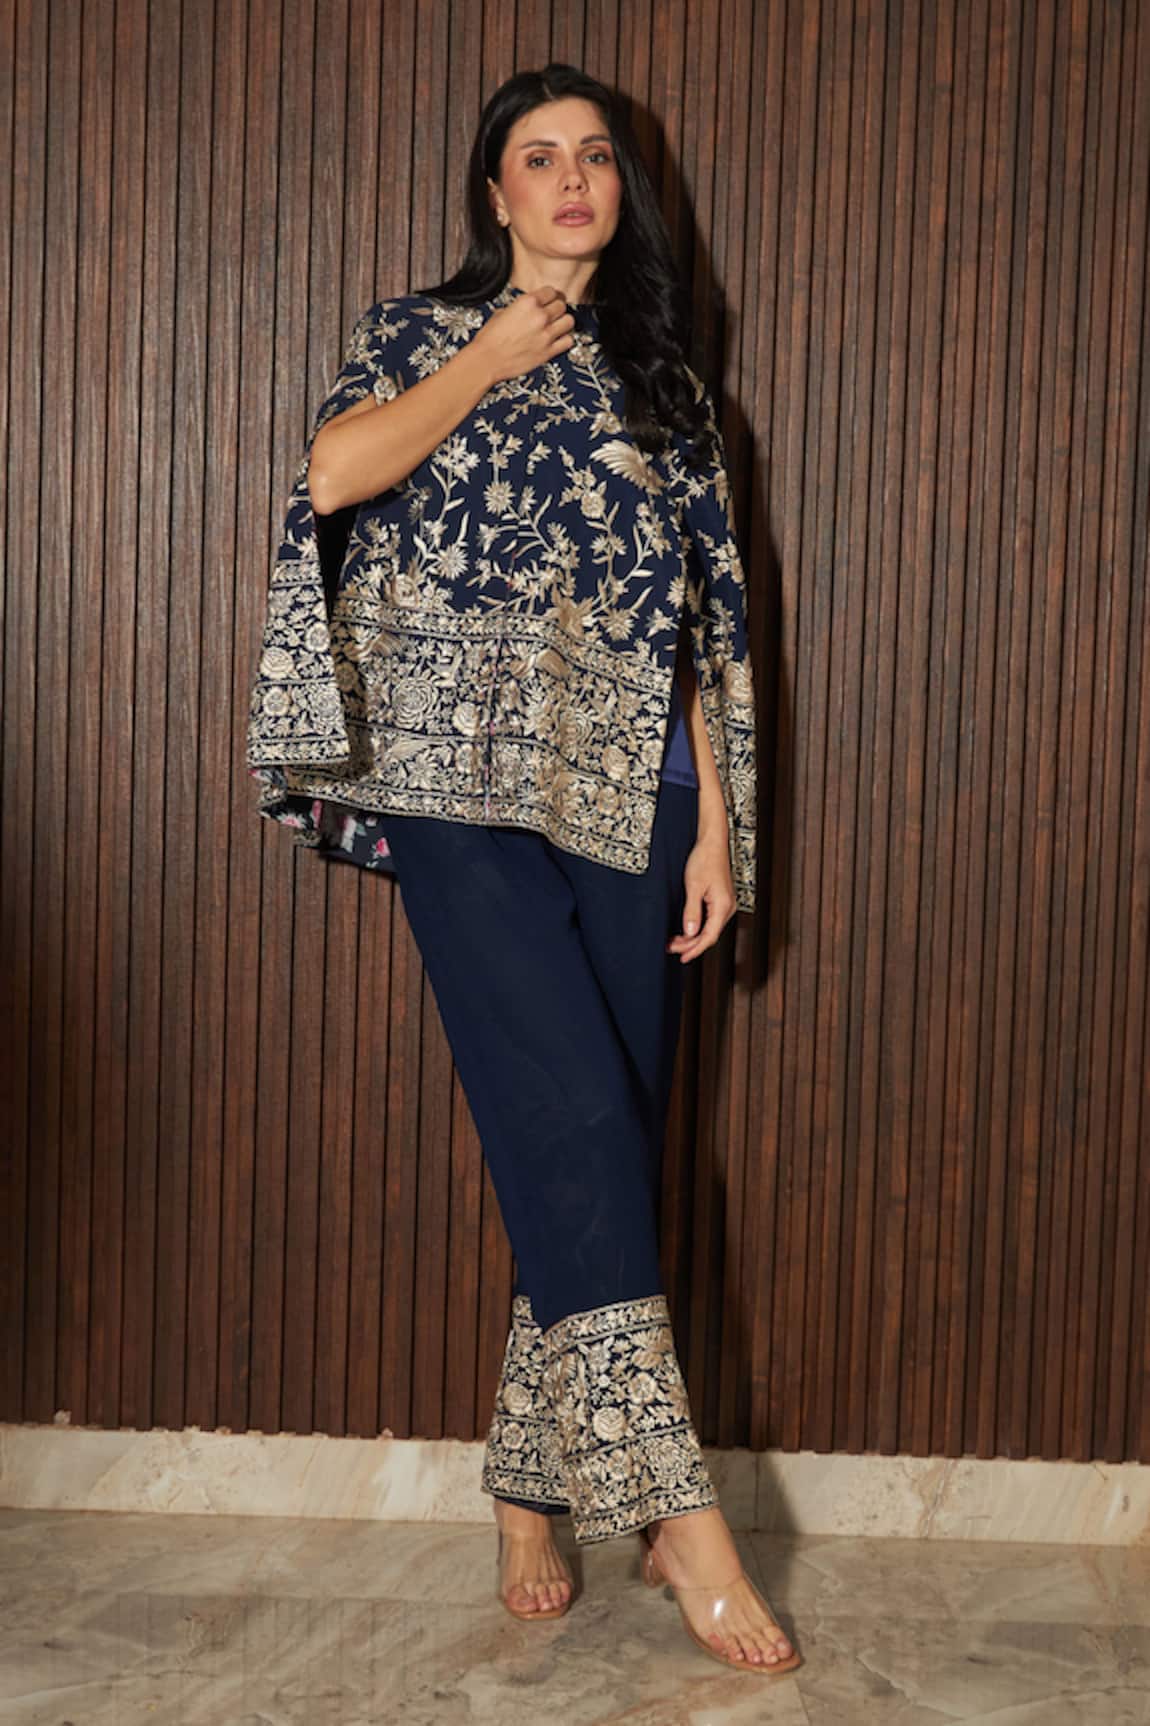 Tasuvure Indes Reyna Gara Embroidered Cape Jacket With Pant